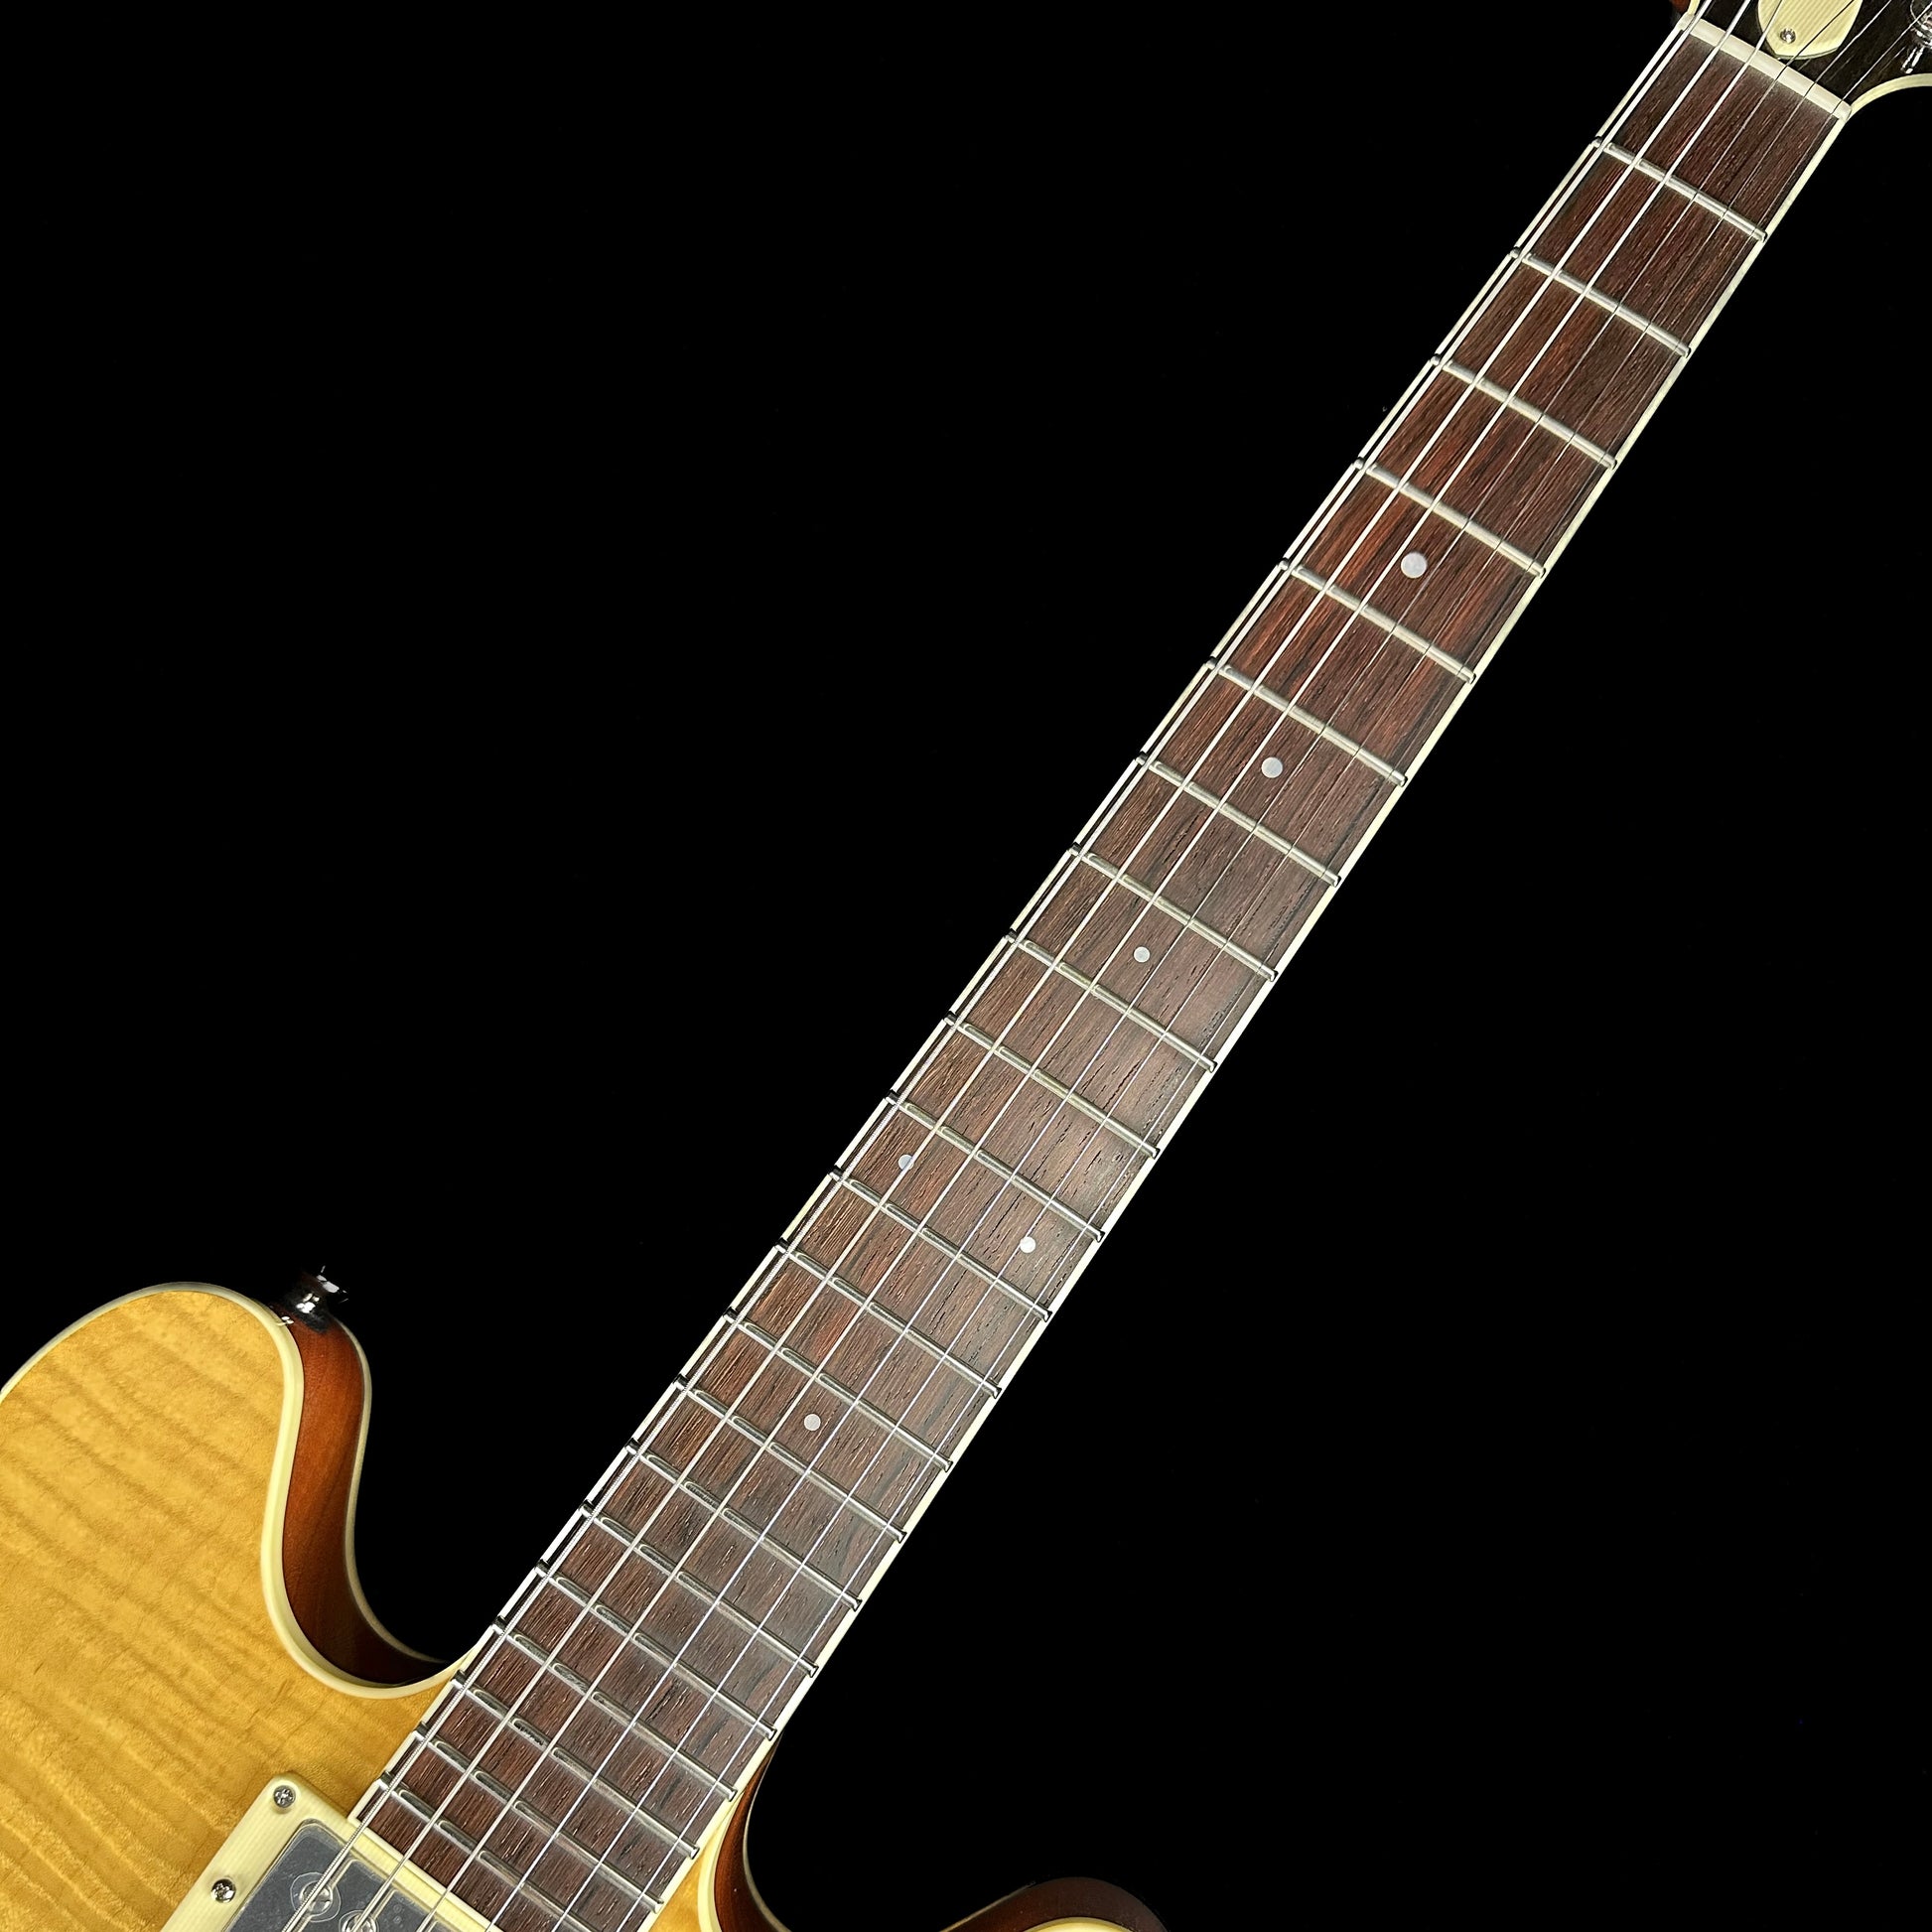 Neck of Collings I-35 Deluxe Blonde Flame Top ThroBaks.